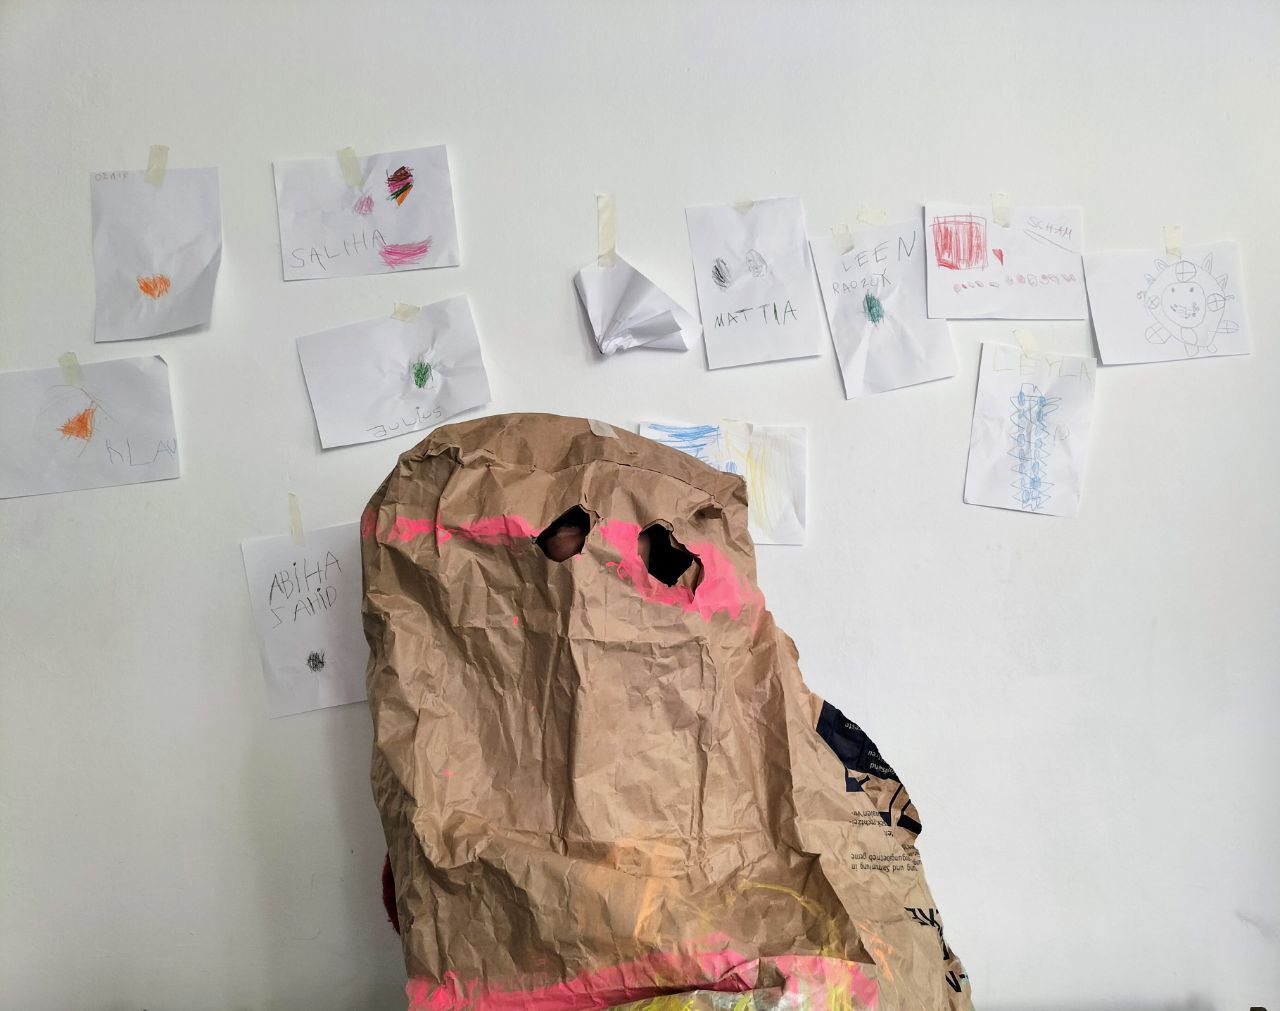 Melanie Hinz wears a brown, crumpled cardboard bag over her face. It looks like a stone and only has small holes cut into it for the eyes and nose. Behind her hang pictures of children.